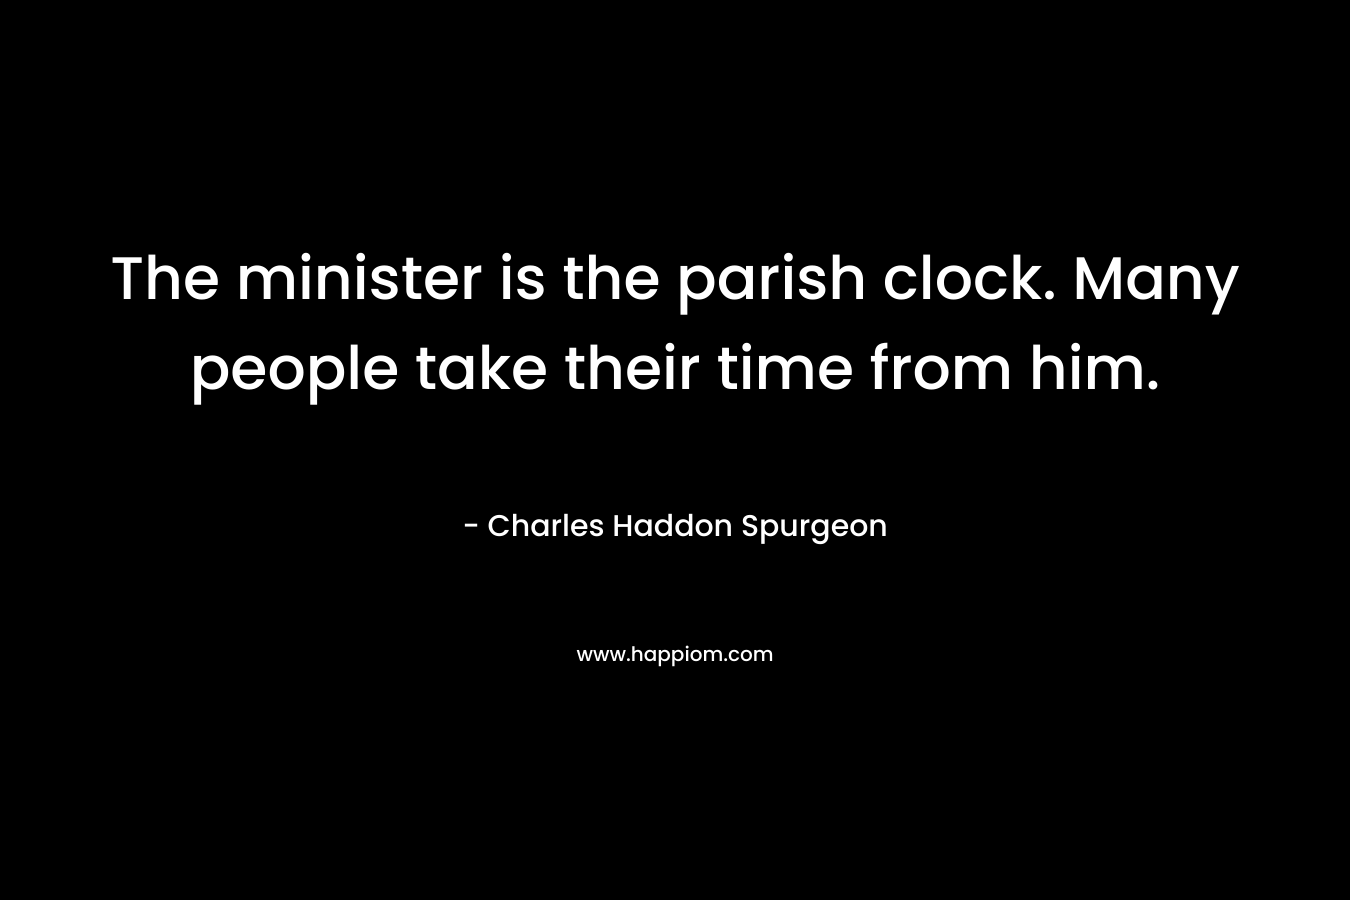 The minister is the parish clock. Many people take their time from him. – Charles Haddon Spurgeon